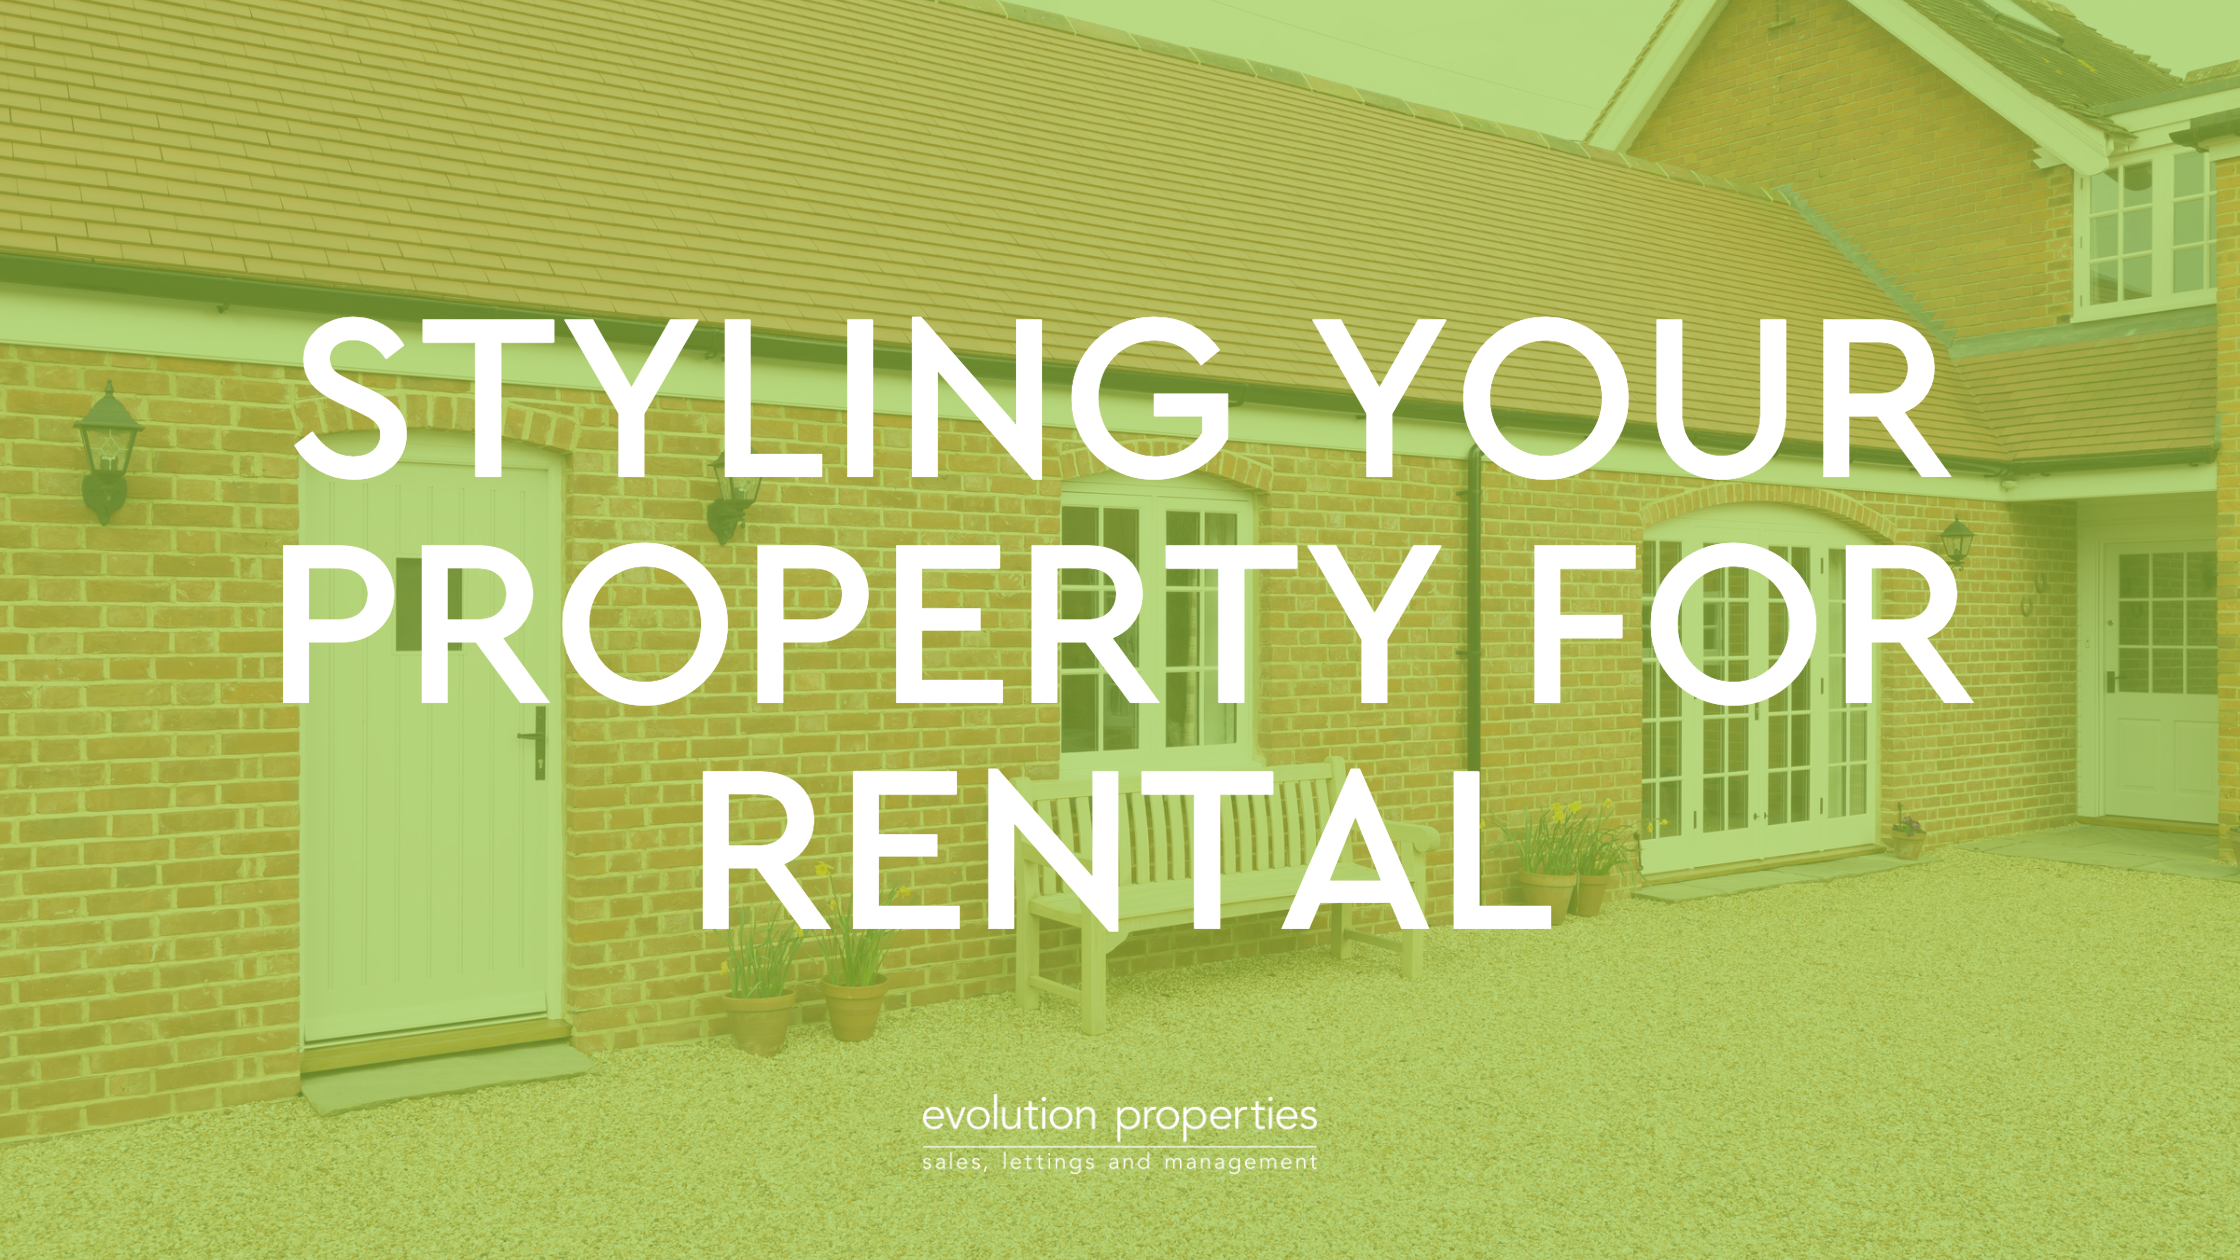 Styling your property for rental